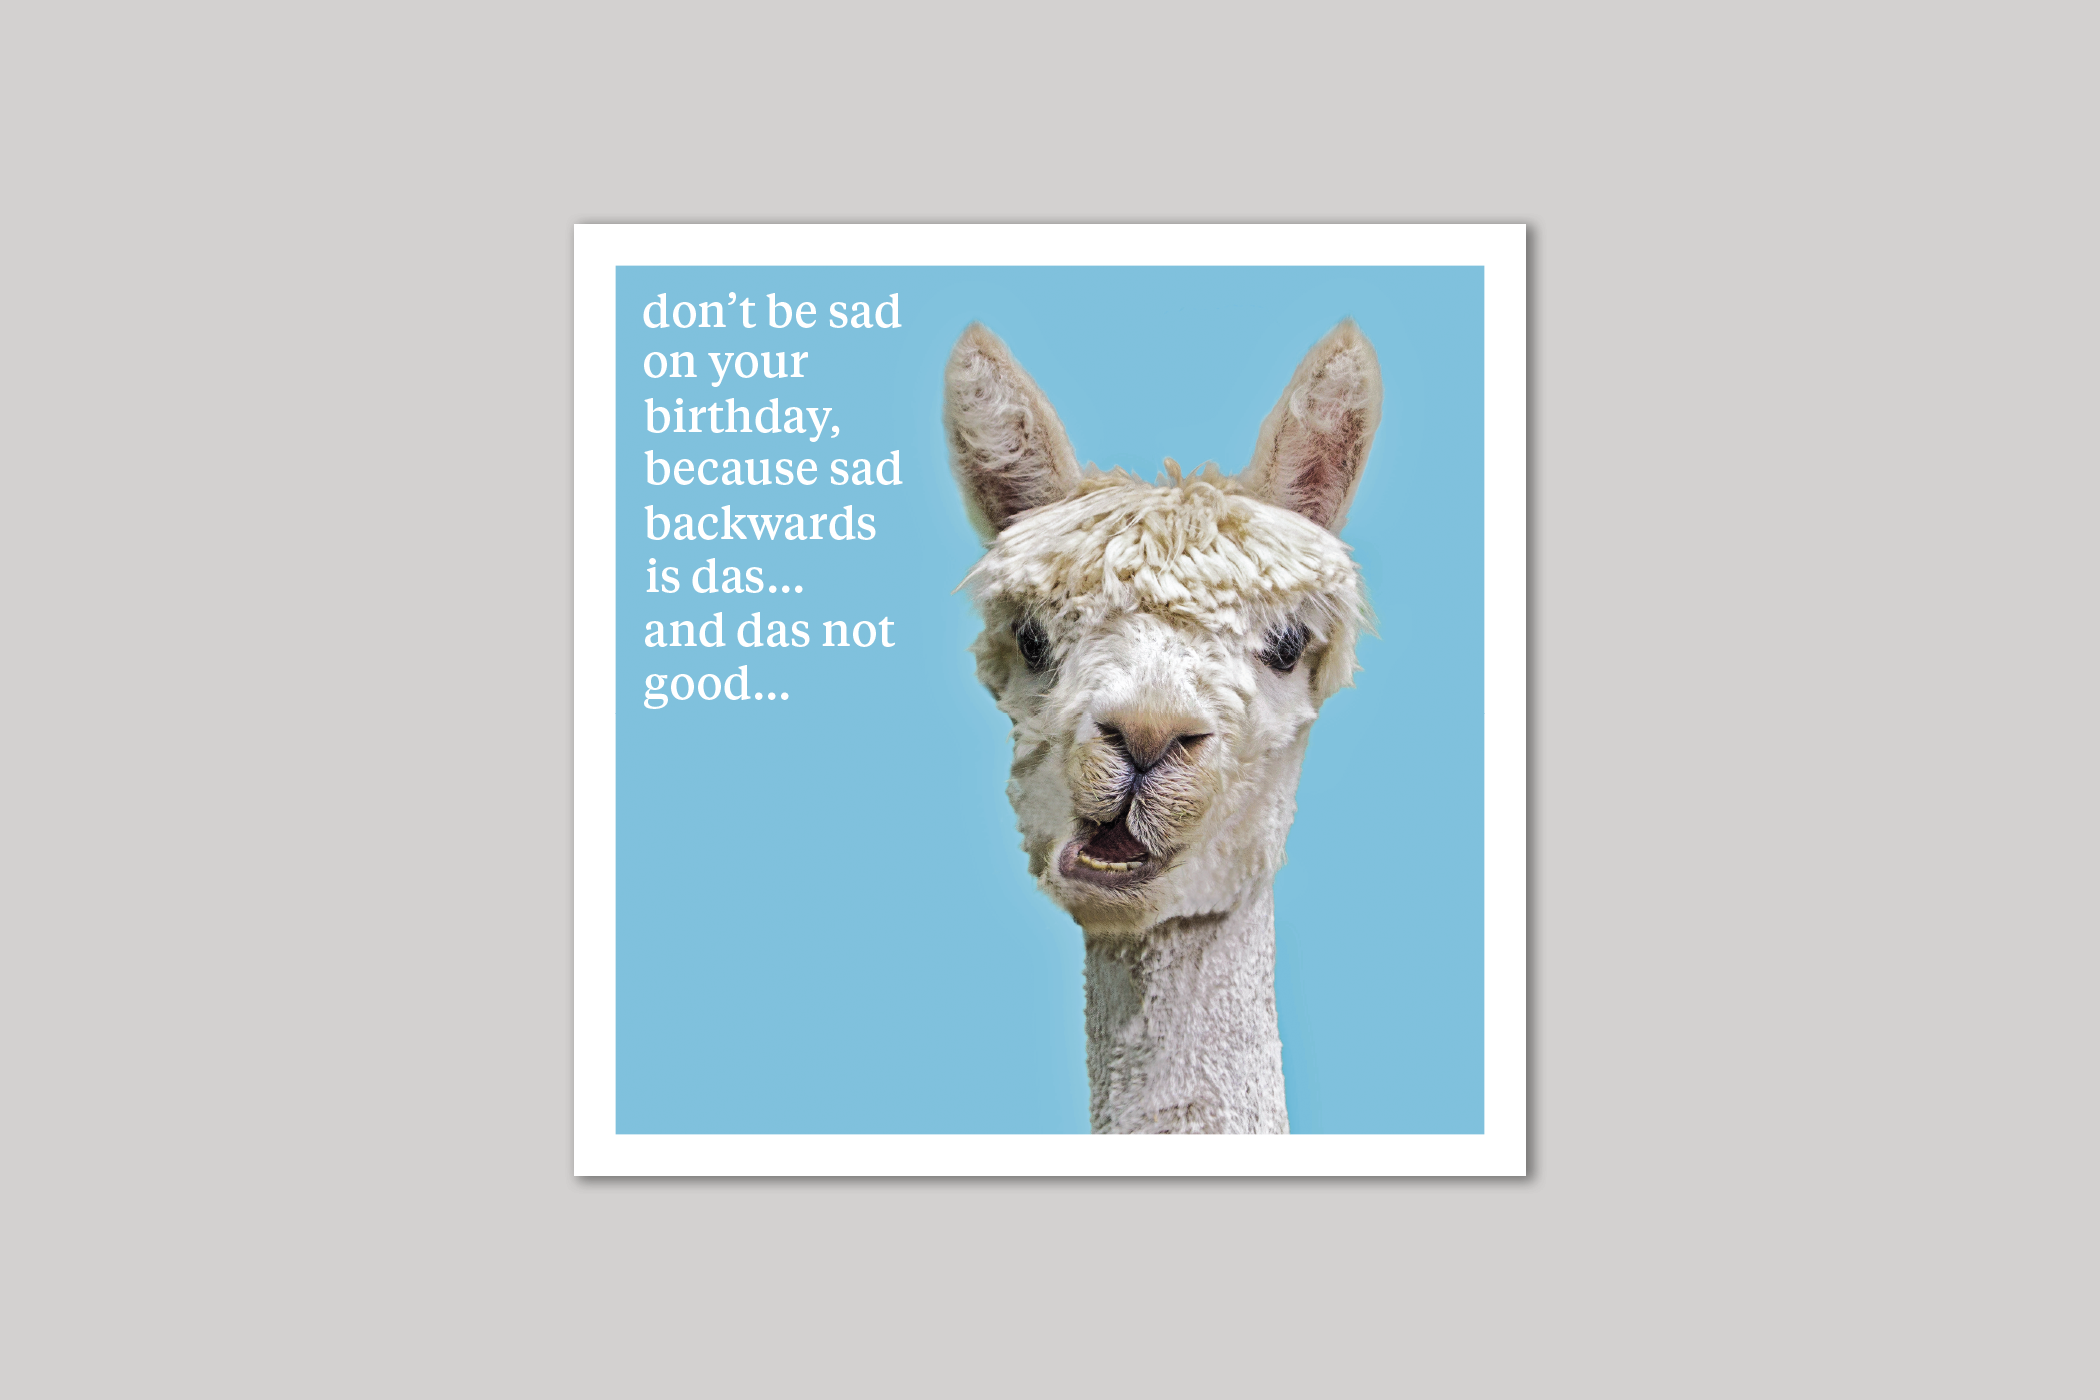 Don't Be Sad quirky animal portrait from Curious World range of greeting cards by Icon.